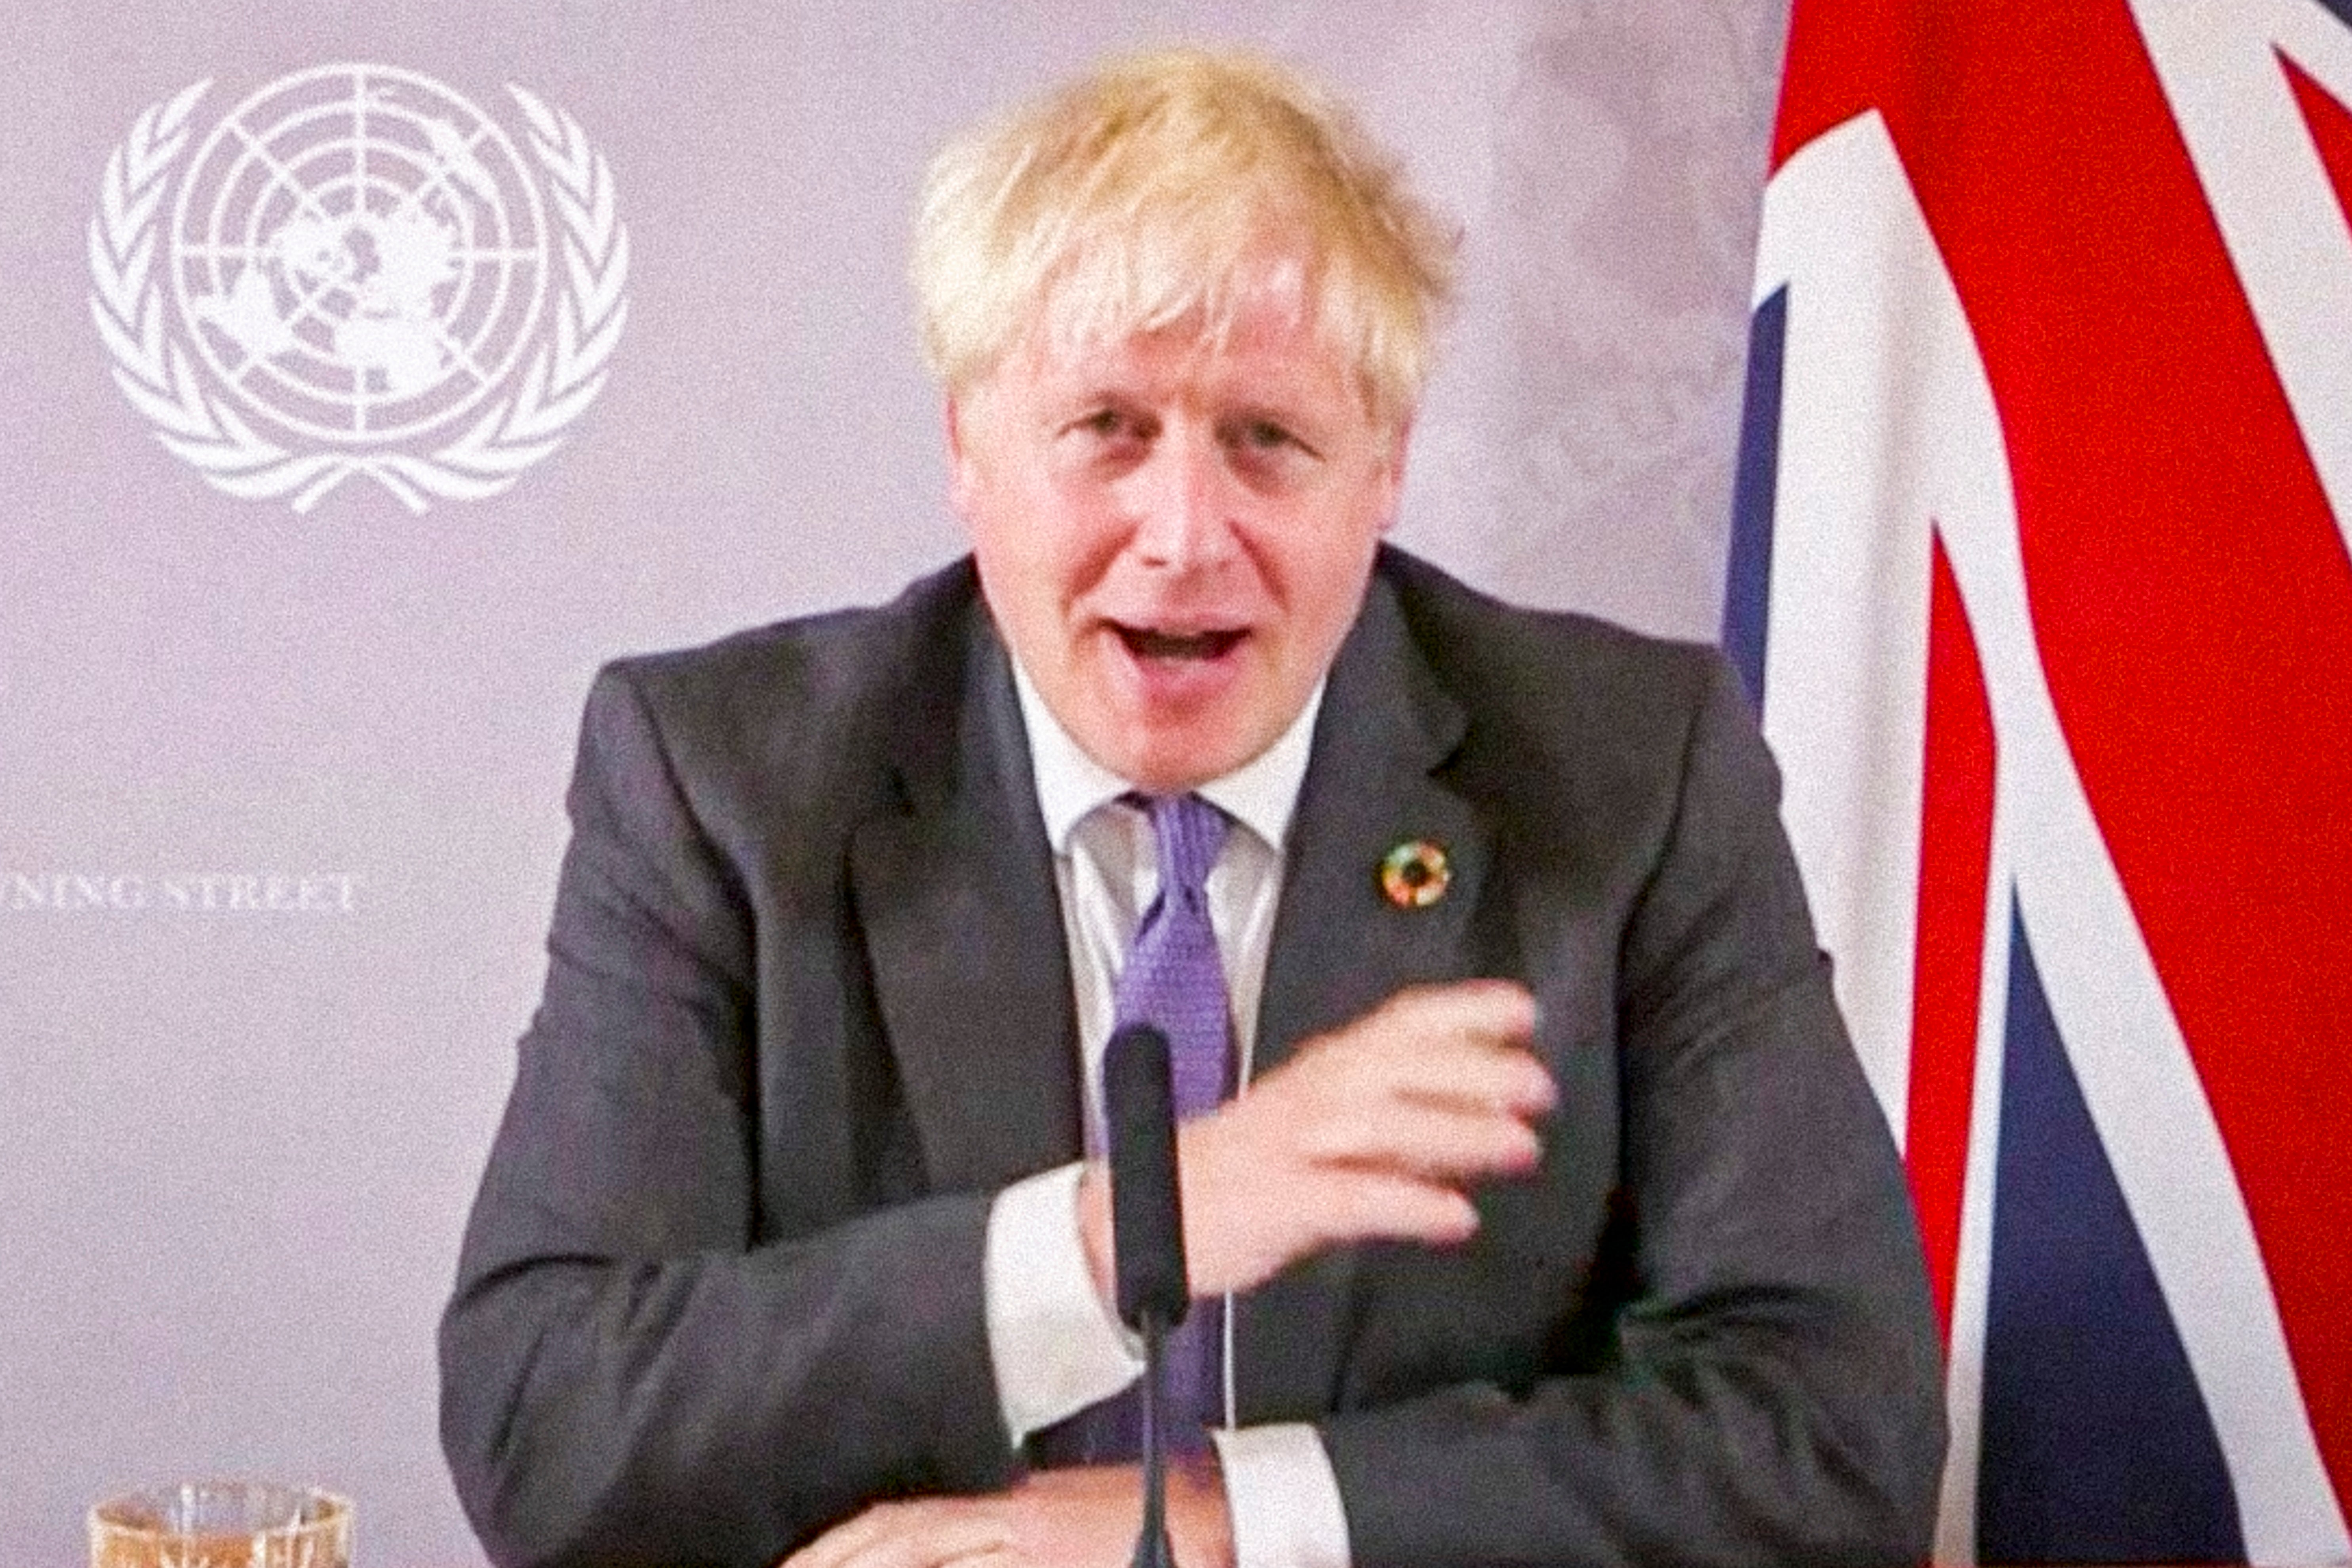 Prime minister Boris Johnson addresses the United Nations by video link